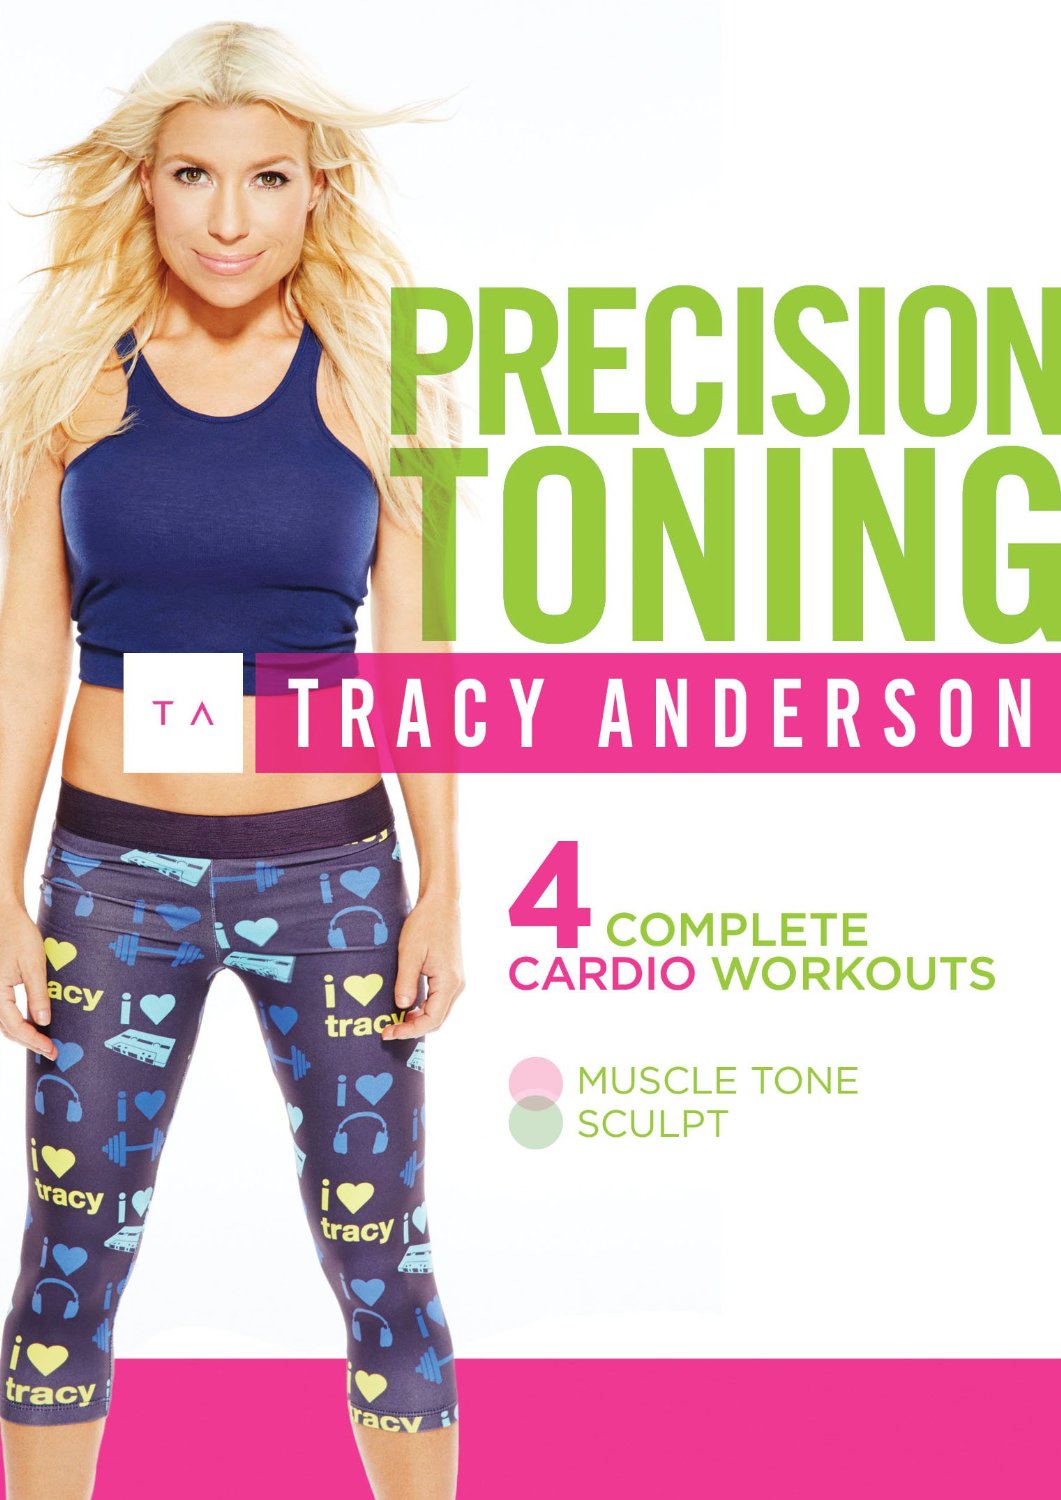 5 Day 8 Minute Arm Workout Tracy Anderson for push your ABS